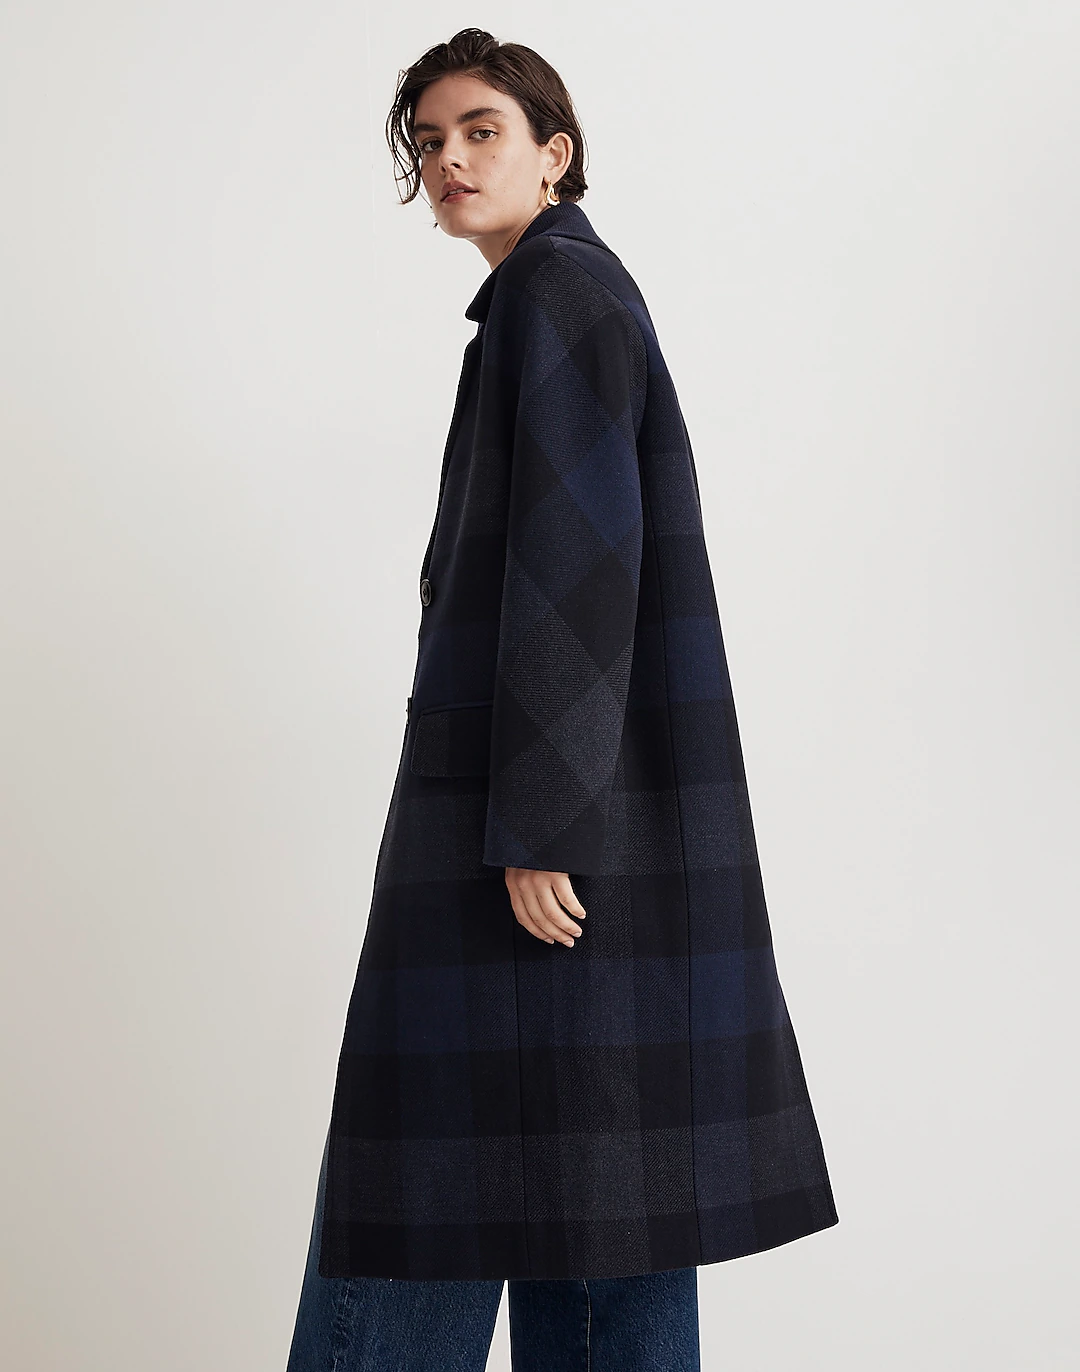 Madewell + The Gianna Coat in Plaid Insuluxe Fabric